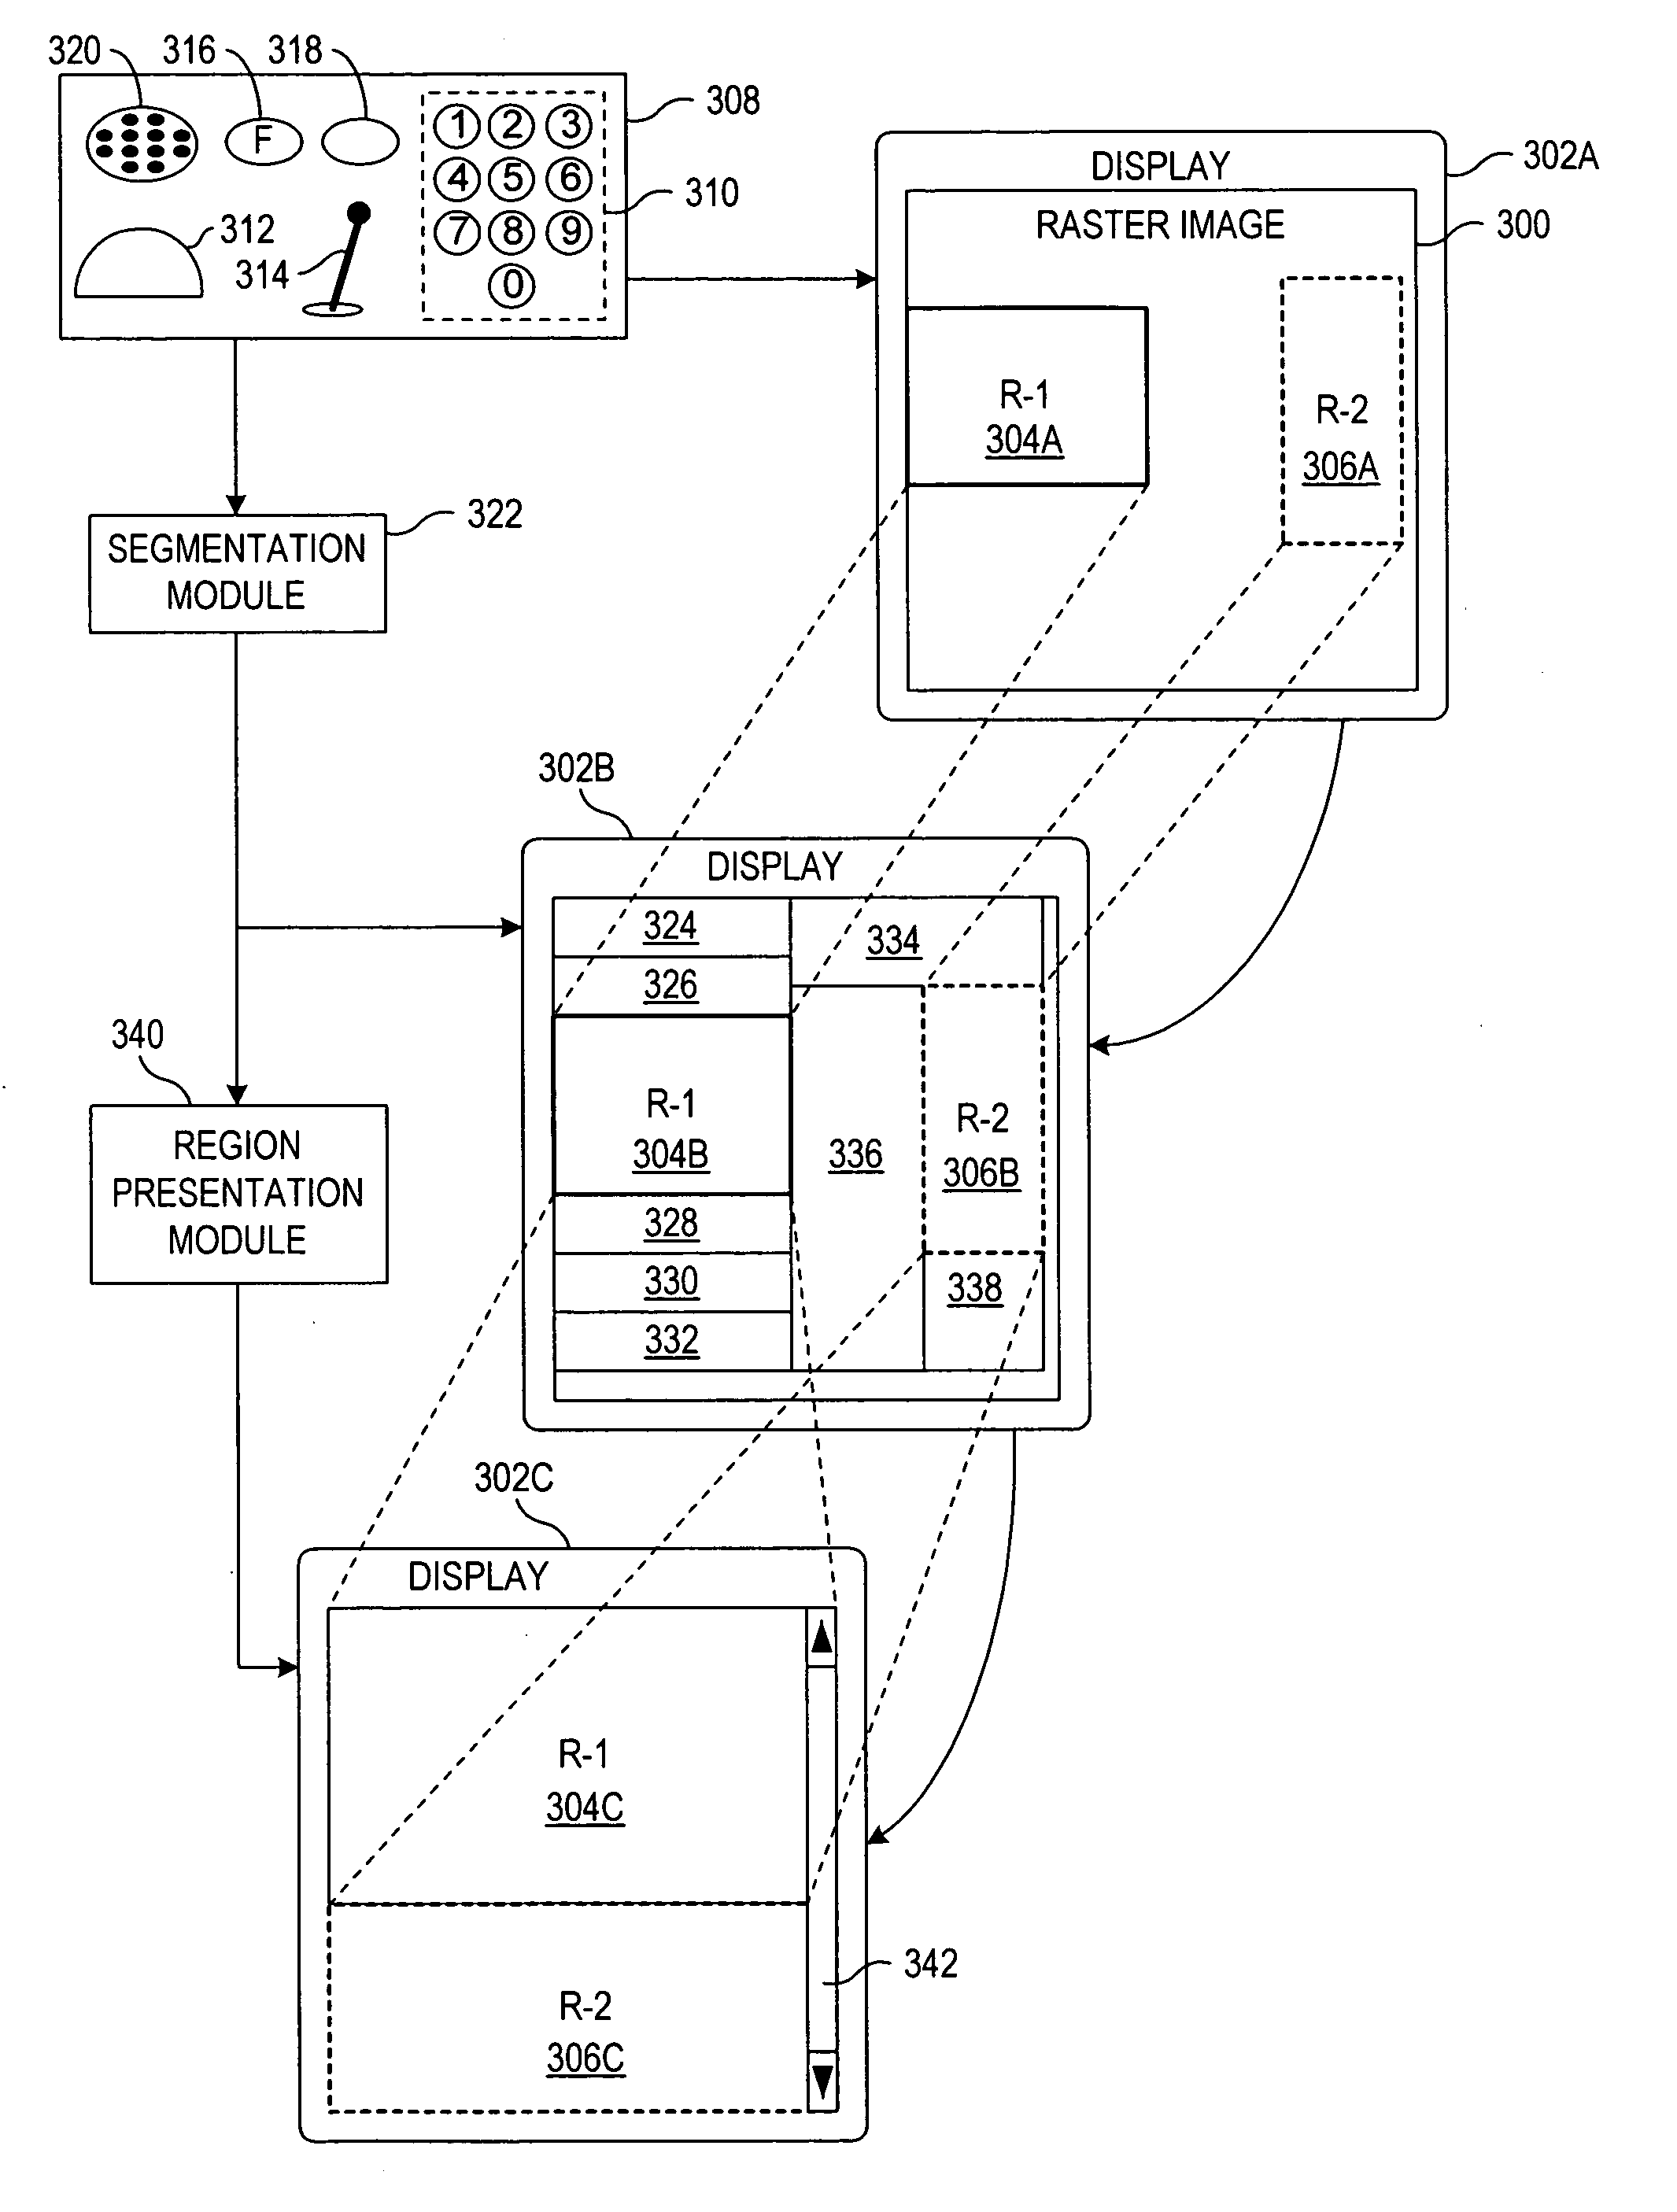 System and method for facilitating the presentation of content via device displays